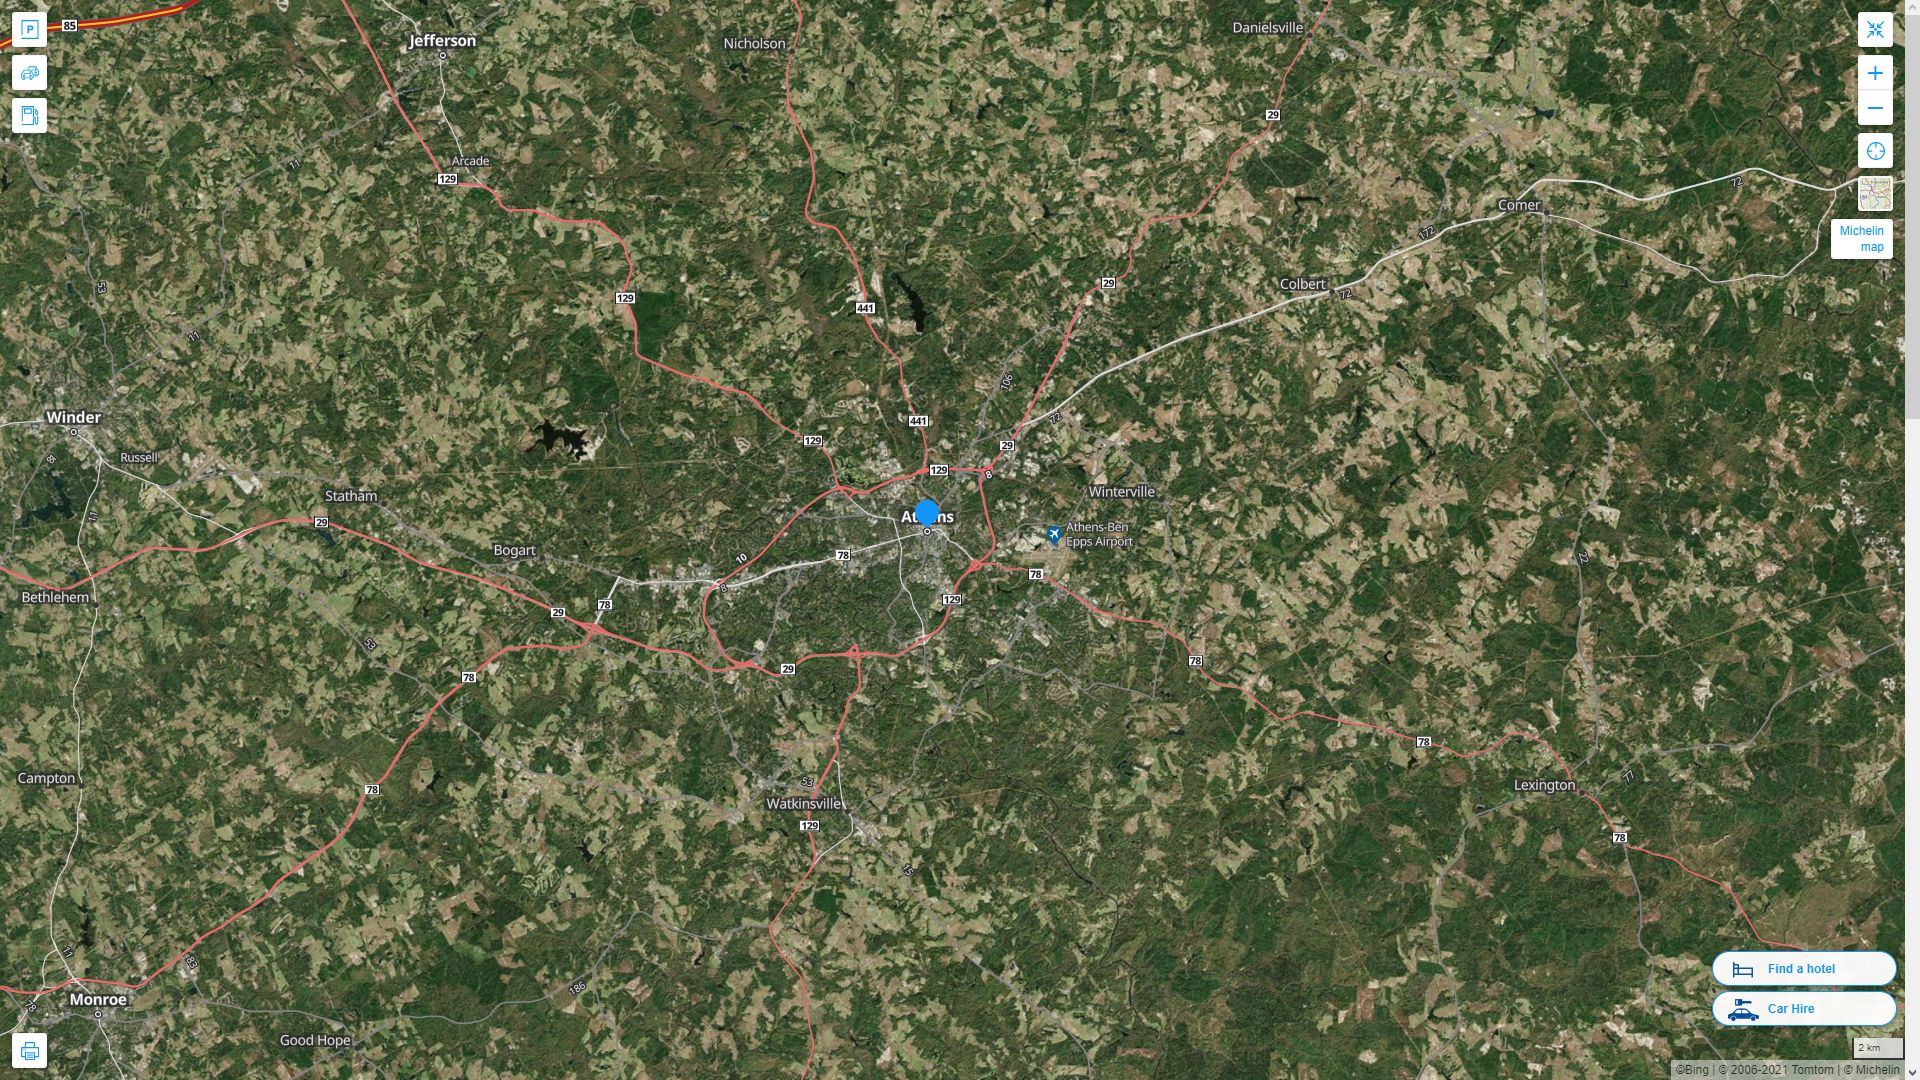 Athens Georgia Highway and Road Map with Satellite View